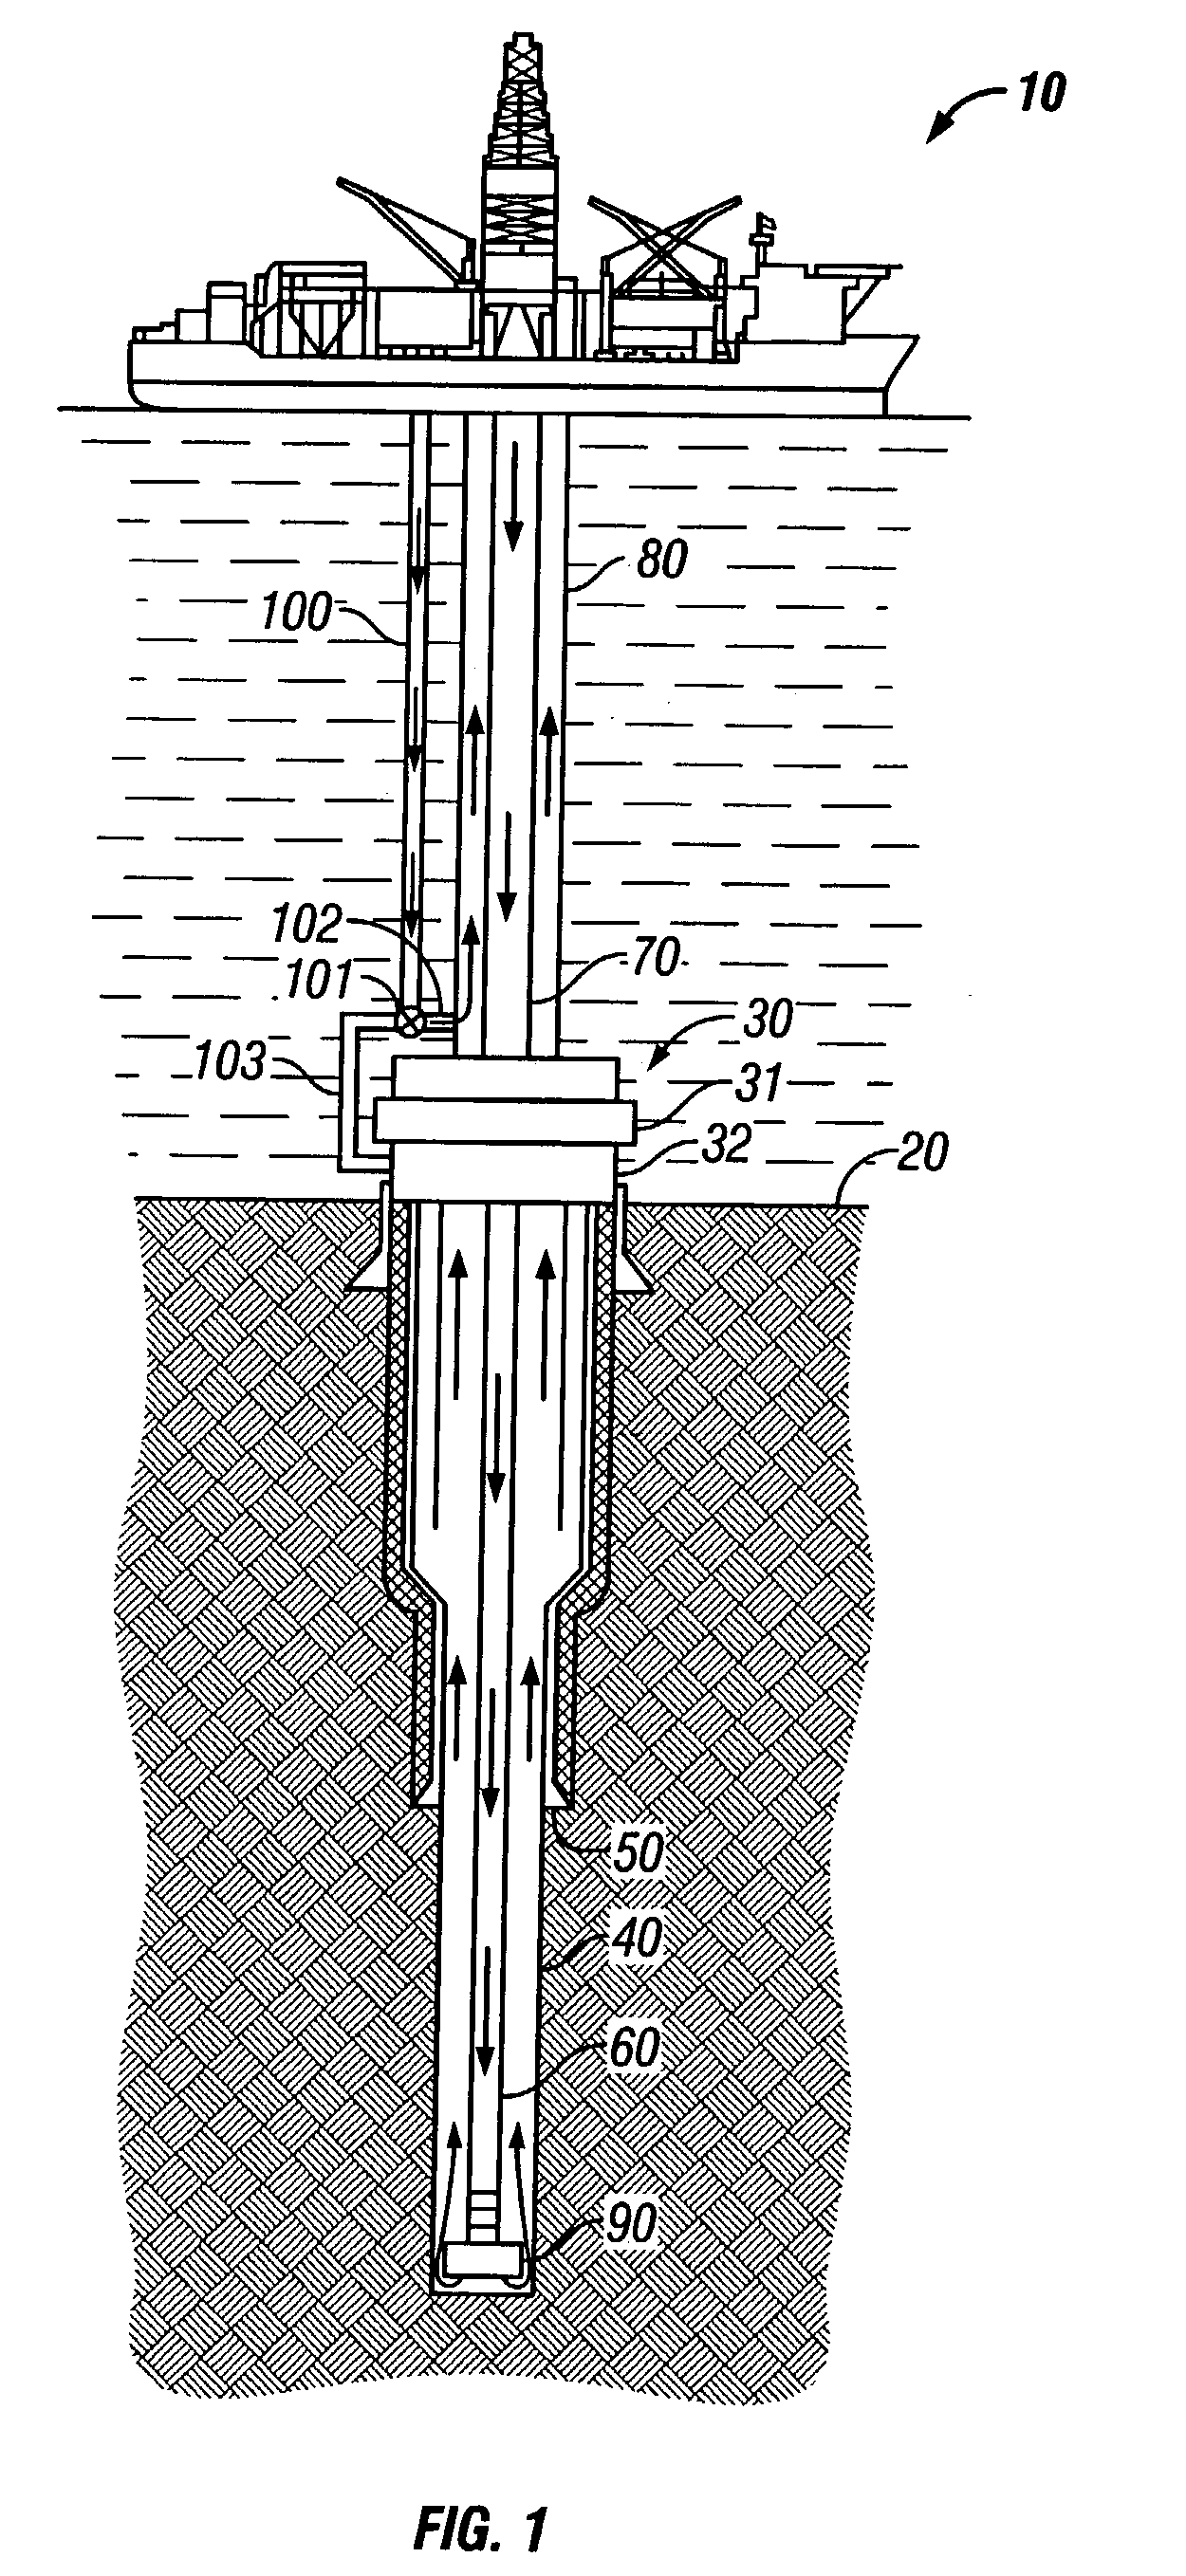 System and method for treating drilling mud in oil and gas well drilling applications